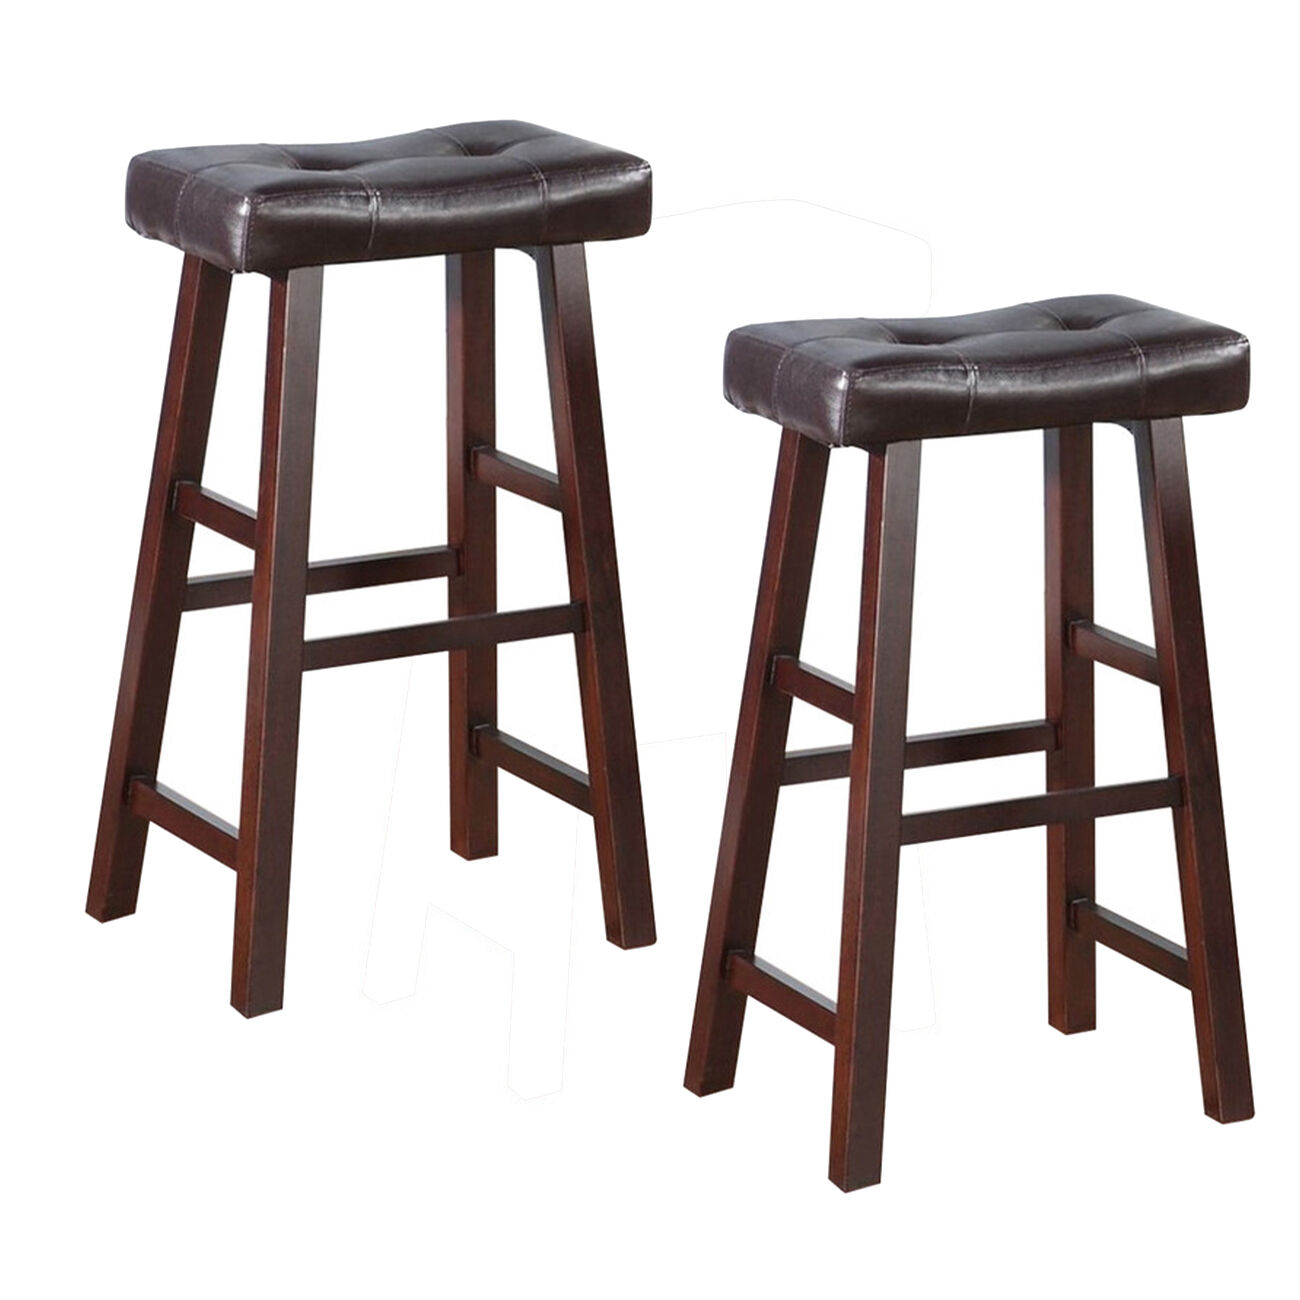 Leather Upholstered Wooden Bar Stools Brown Set Of 2